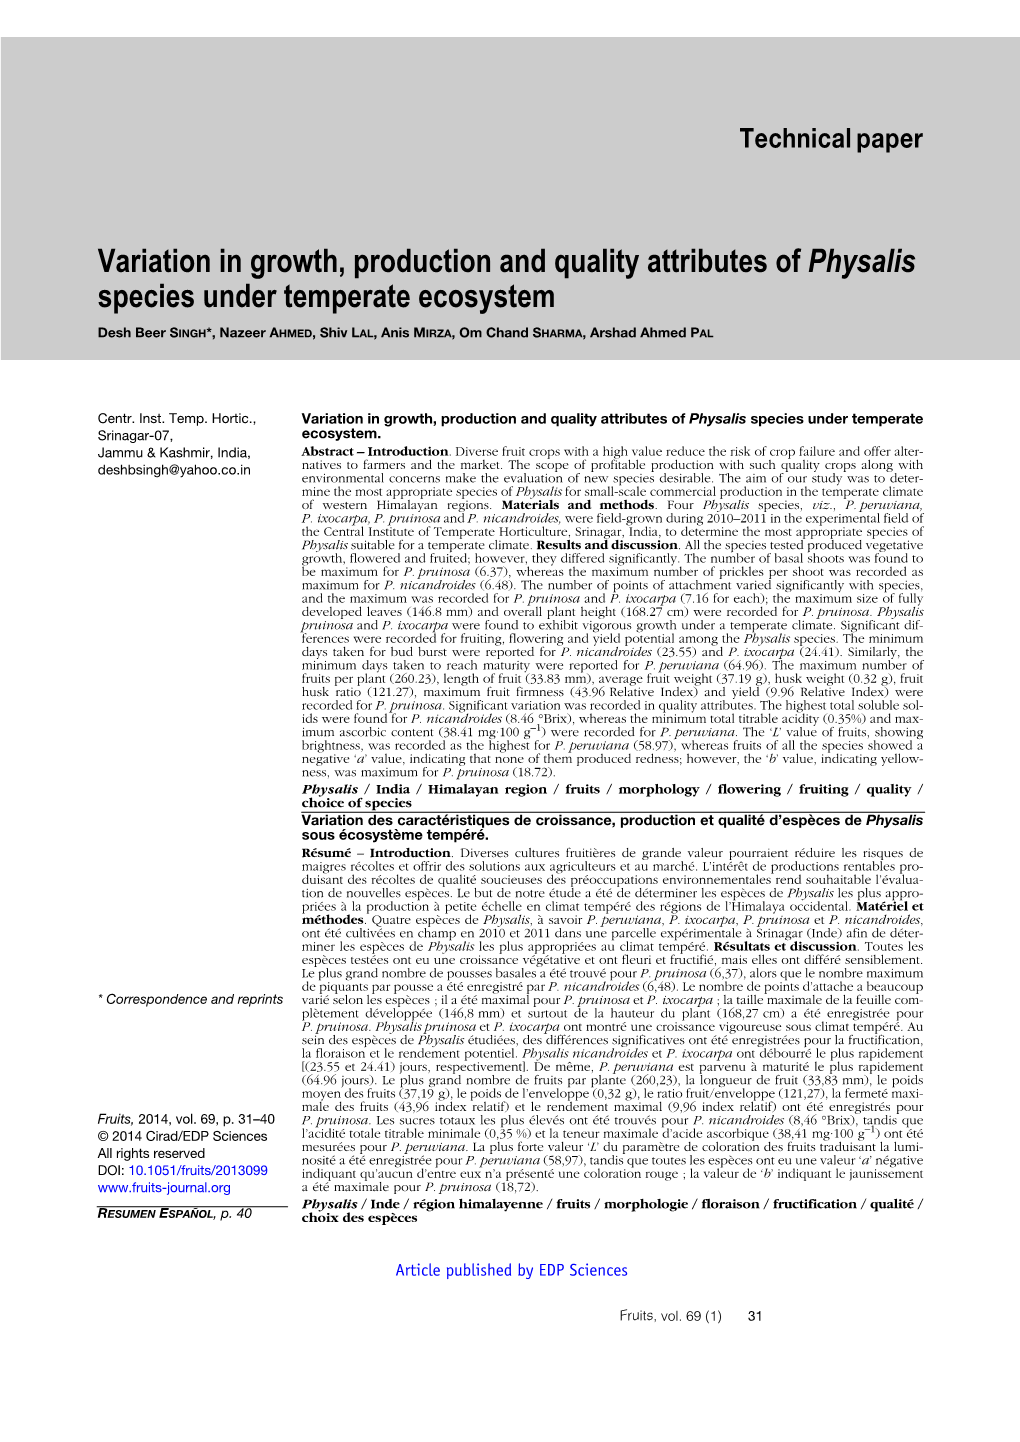 Variation in Growth, Production and Quality Attributes of Physalis Species Under Temperate Ecosystem